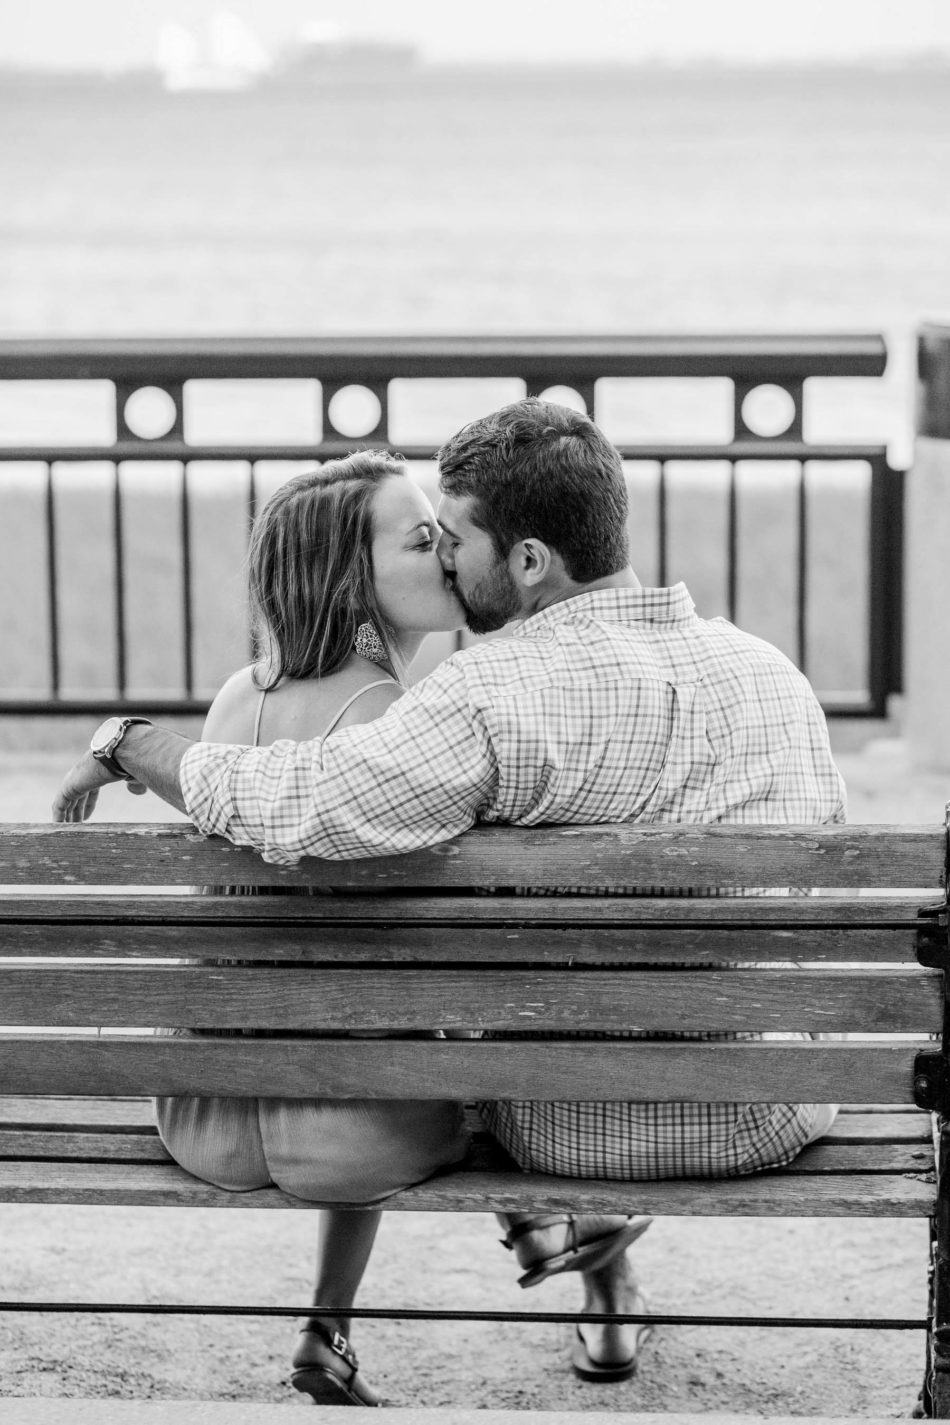 Engaged couple sits on a bench, watching the ocean, Waterfront Park, Charleston, South Carolina Kate Timbers Photography. http://katetimbers.com #katetimbersphotography // Charleston Photography // Inspiration